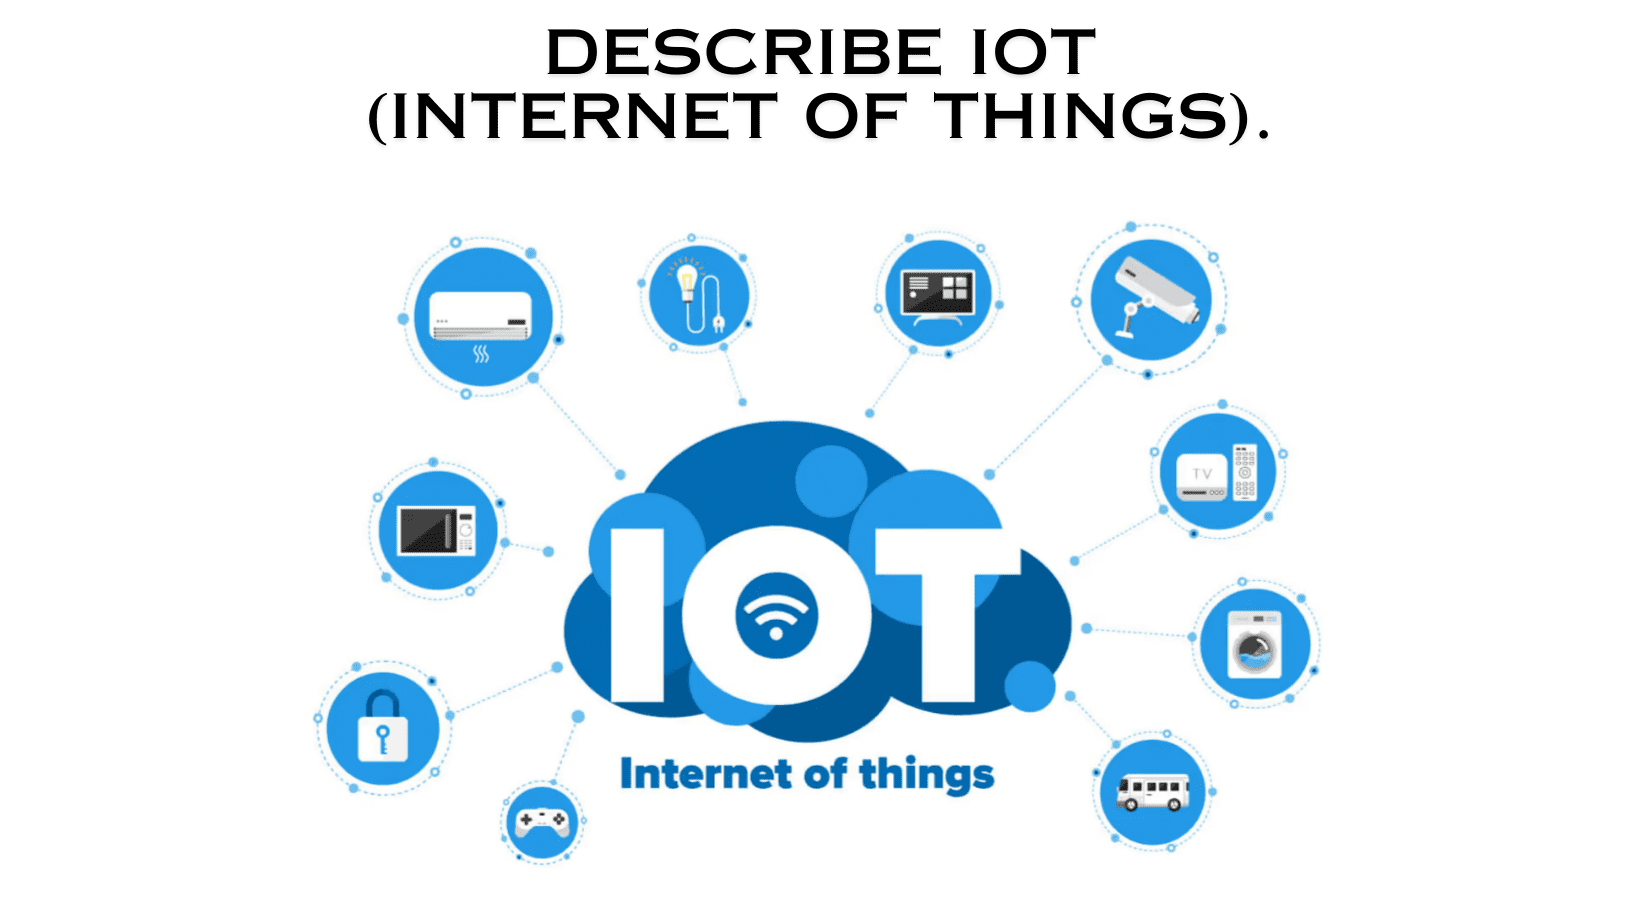 Describe IoT (Internet of things)